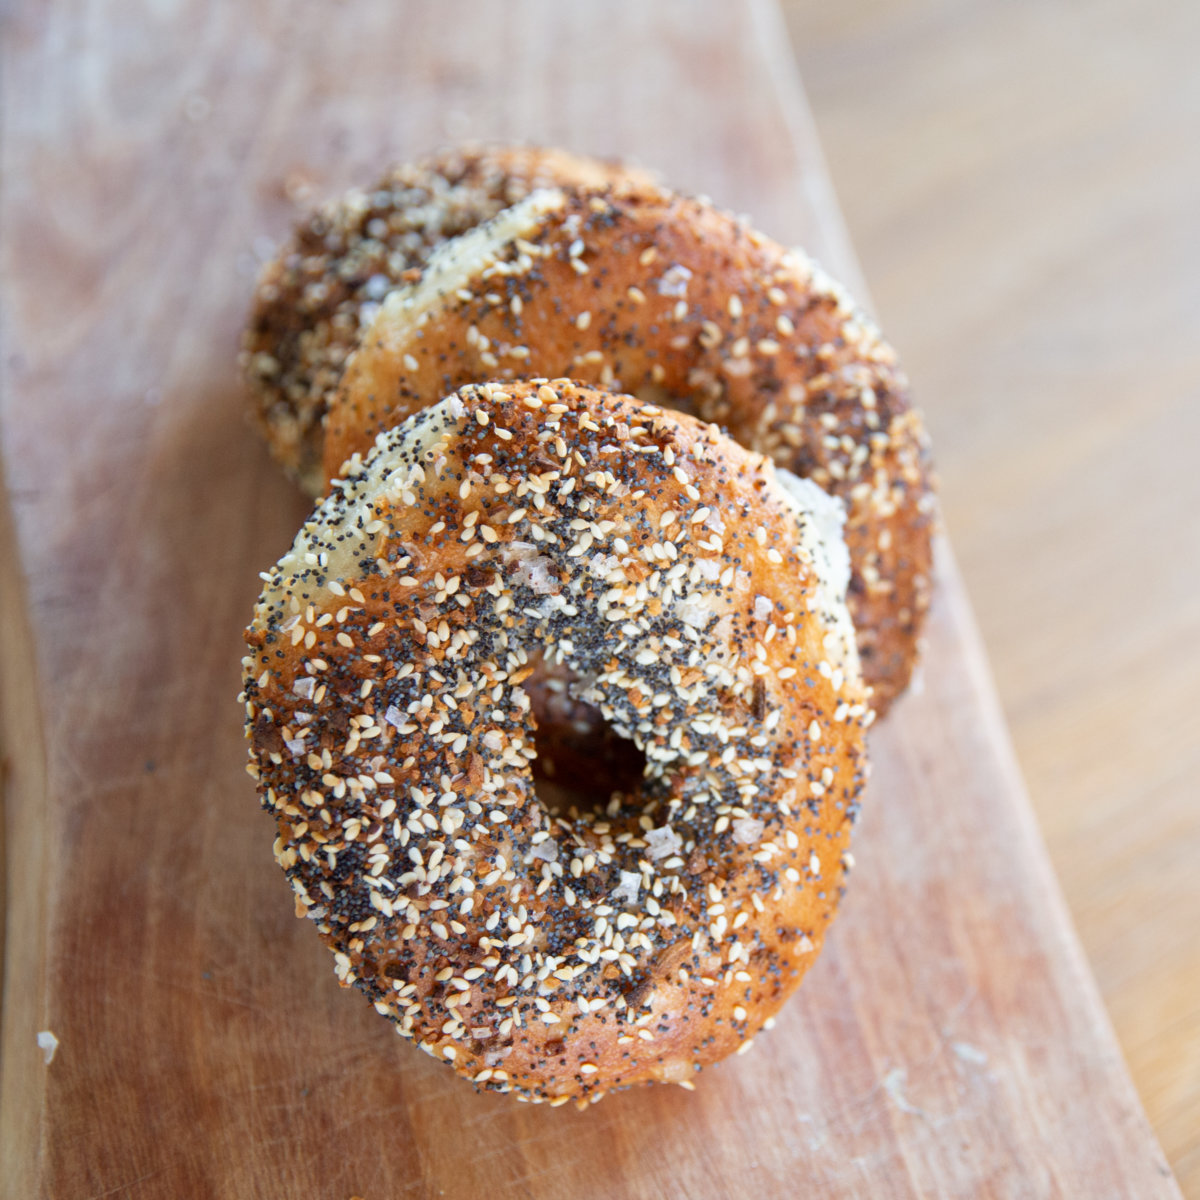 @PopUpBagels may not be famous yet, but they're certainly well-loved